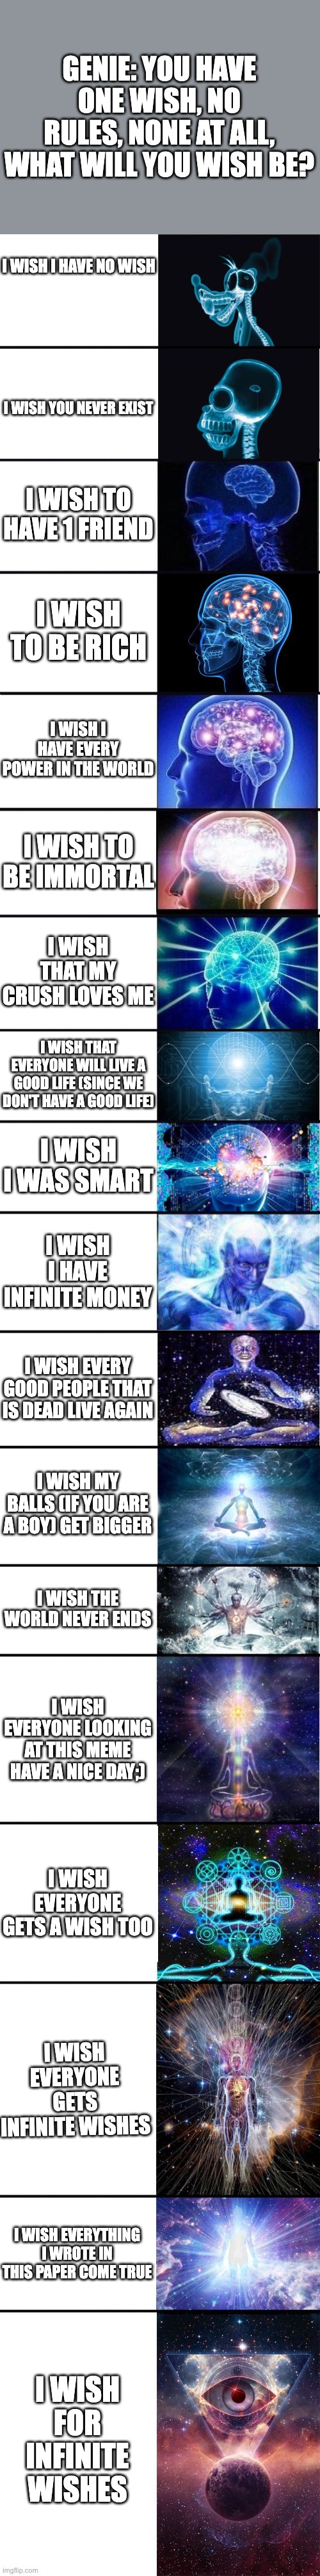 expanding brain: 9001 | GENIE: YOU HAVE ONE WISH, NO RULES, NONE AT ALL, WHAT WILL YOU WISH BE? I WISH I HAVE NO WISH; I WISH YOU NEVER EXIST; I WISH TO HAVE 1 FRIEND; I WISH TO BE RICH; I WISH I HAVE EVERY POWER IN THE WORLD; I WISH TO BE IMMORTAL; I WISH THAT MY CRUSH LOVES ME; I WISH THAT EVERYONE WILL LIVE A GOOD LIFE (SINCE WE DON'T HAVE A GOOD LIFE); I WISH I WAS SMART; I WISH I HAVE INFINITE MONEY; I WISH EVERY GOOD PEOPLE THAT IS DEAD LIVE AGAIN; I WISH MY BALLS (IF YOU ARE A BOY) GET BIGGER; I WISH THE WORLD NEVER ENDS; I WISH EVERYONE LOOKING AT THIS MEME HAVE A NICE DAY;); I WISH EVERYONE GETS A WISH TOO; I WISH EVERYONE GETS INFINITE WISHES; I WISH EVERYTHING I WROTE IN THIS PAPER COME TRUE; I WISH FOR INFINITE WISHES | image tagged in expanding brain 9001 | made w/ Imgflip meme maker